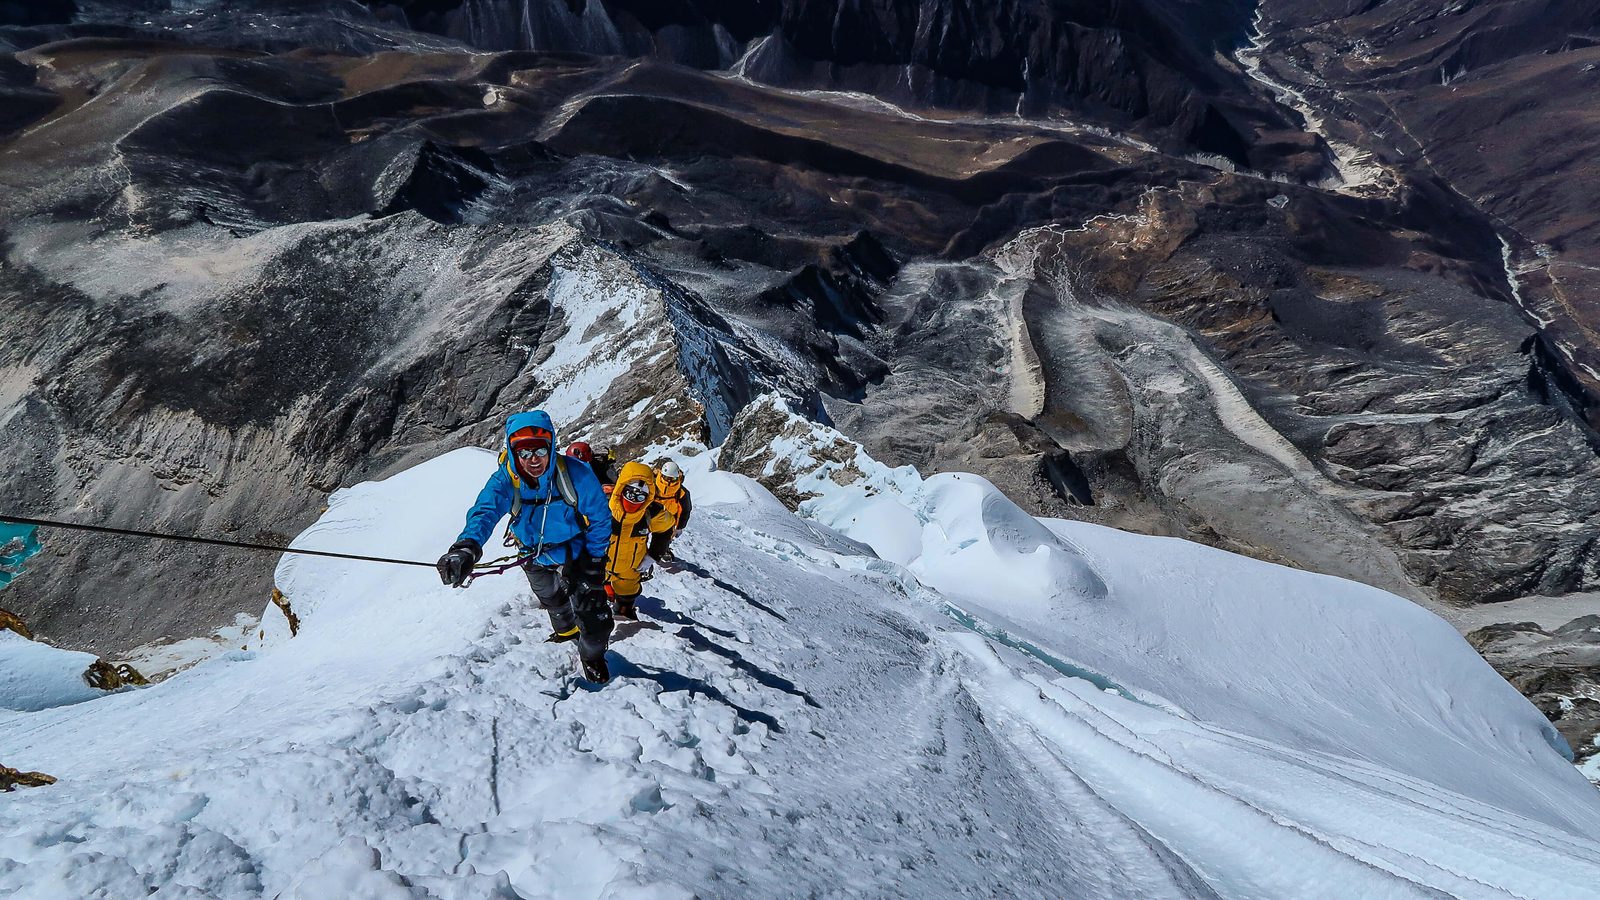 How To Prepare for Climbing Mount Everest Logistics and Physical